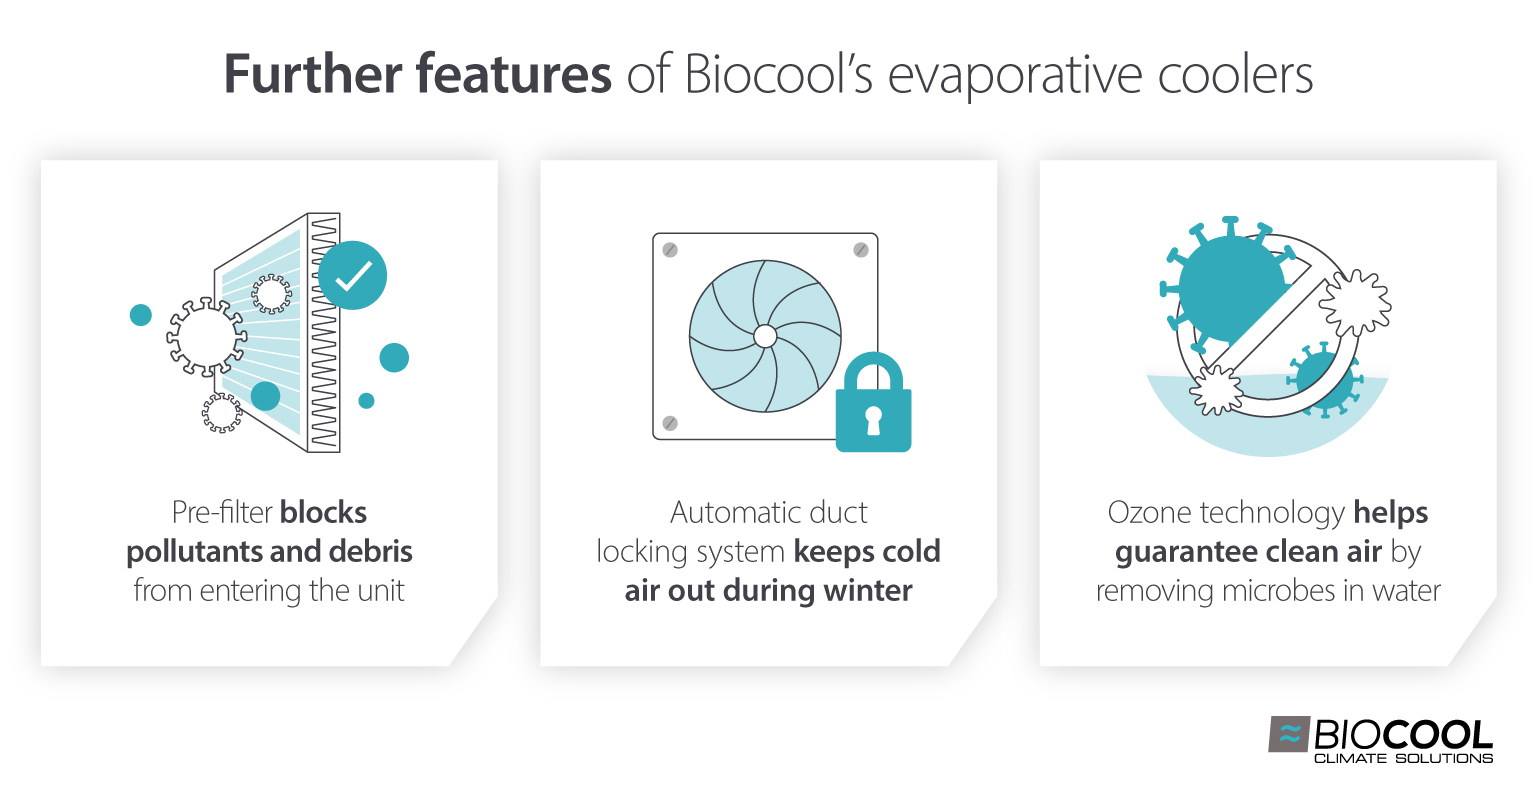 Features of Biocool Evaporative Coolers to improve workplaces and employee health